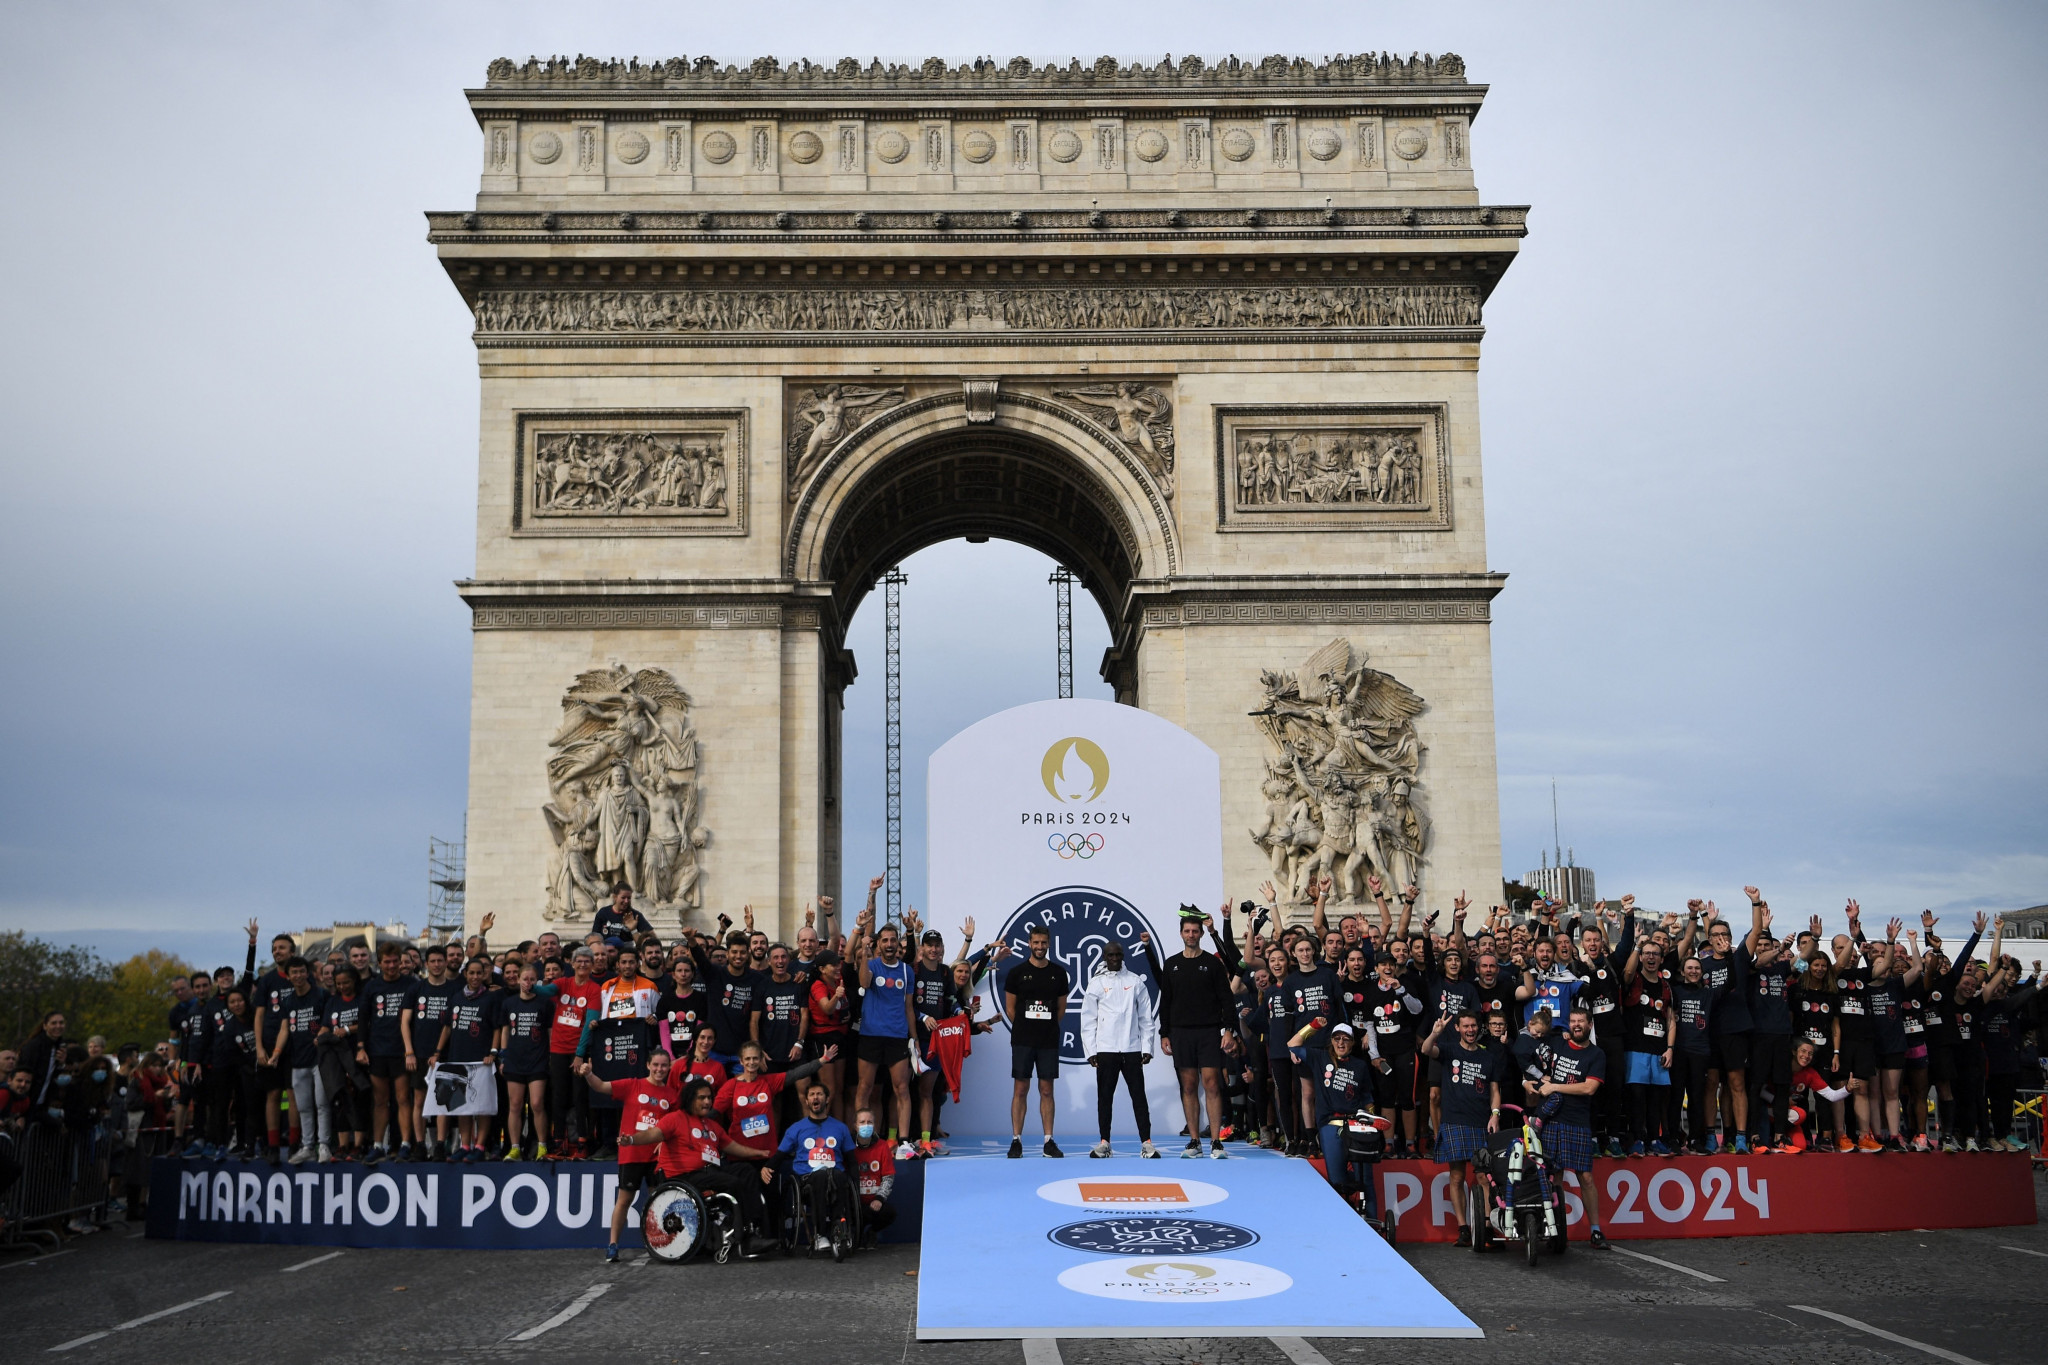 Around 3,600 runners raced against Eliud Kipchoge in Paris ©Getty Images